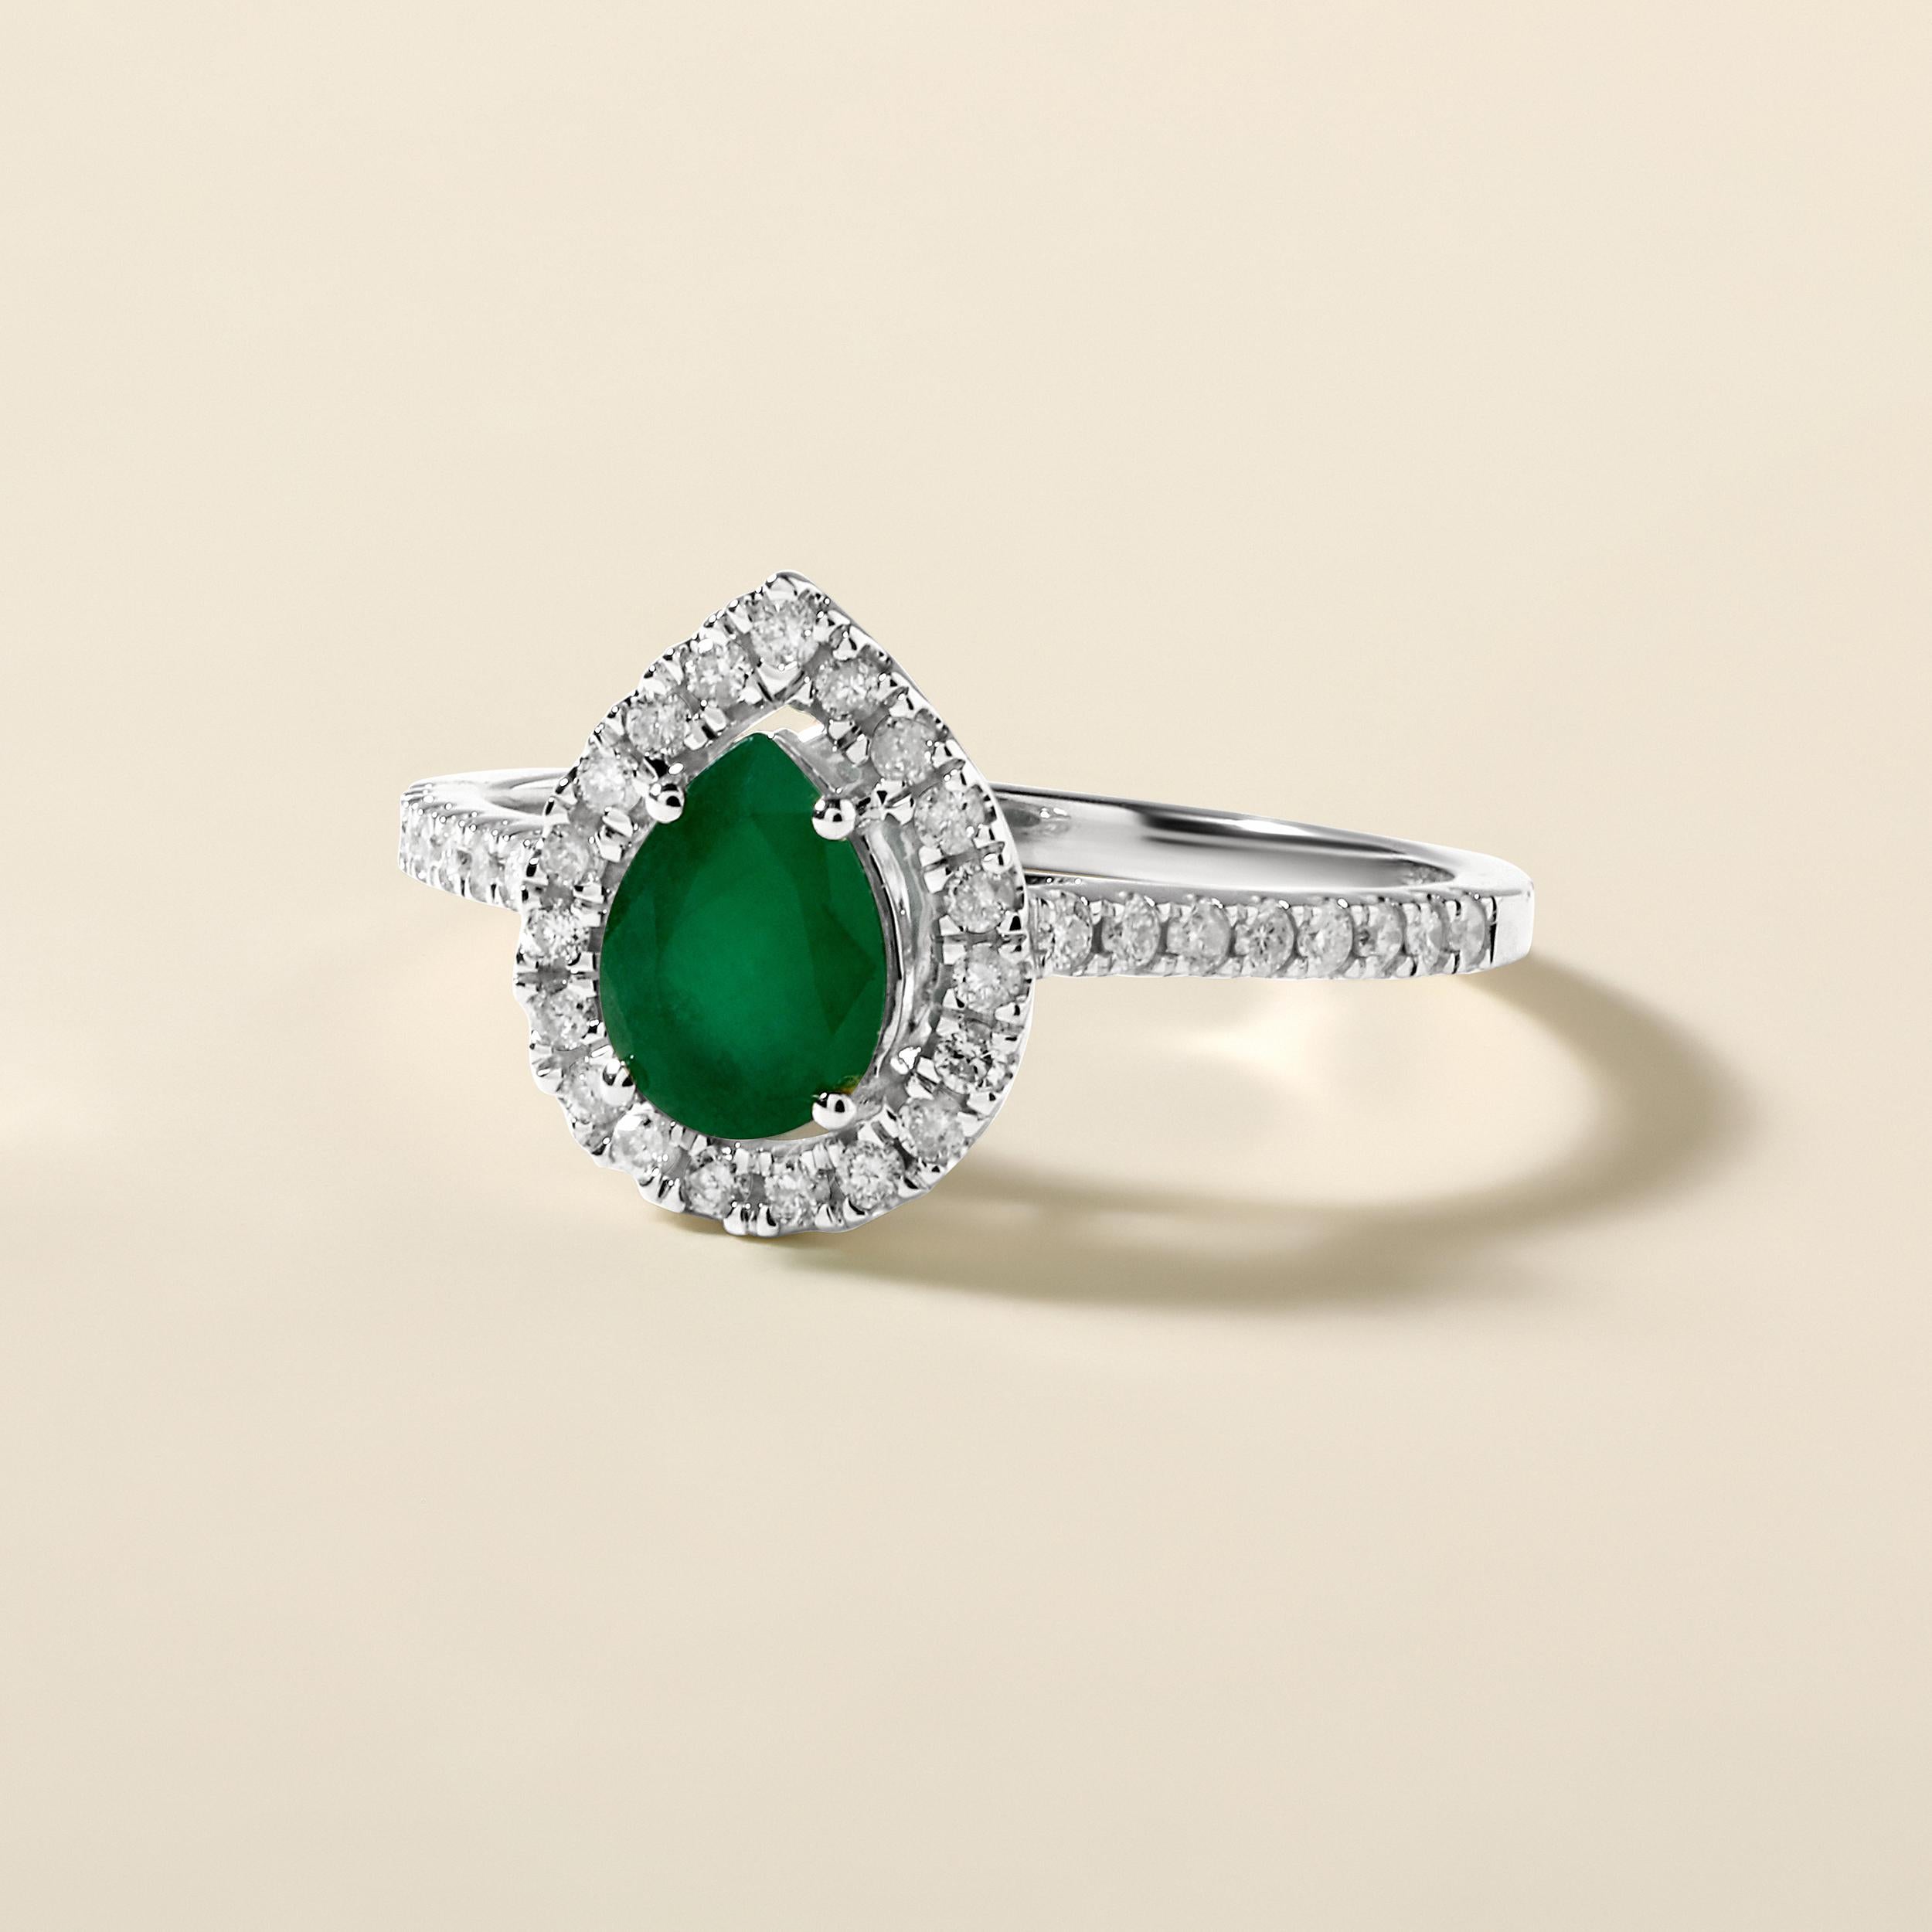 Ring Size: US 7

Crafted in 2.5 grams of 14K White Gold, the ring contains 35 stones of Round Natural Diamonds with a total of 0.28 carat in G-H color and I1-I2 clarity combined with 1 stone of Pear Shaped Natural Emerald Gemstone with a total of